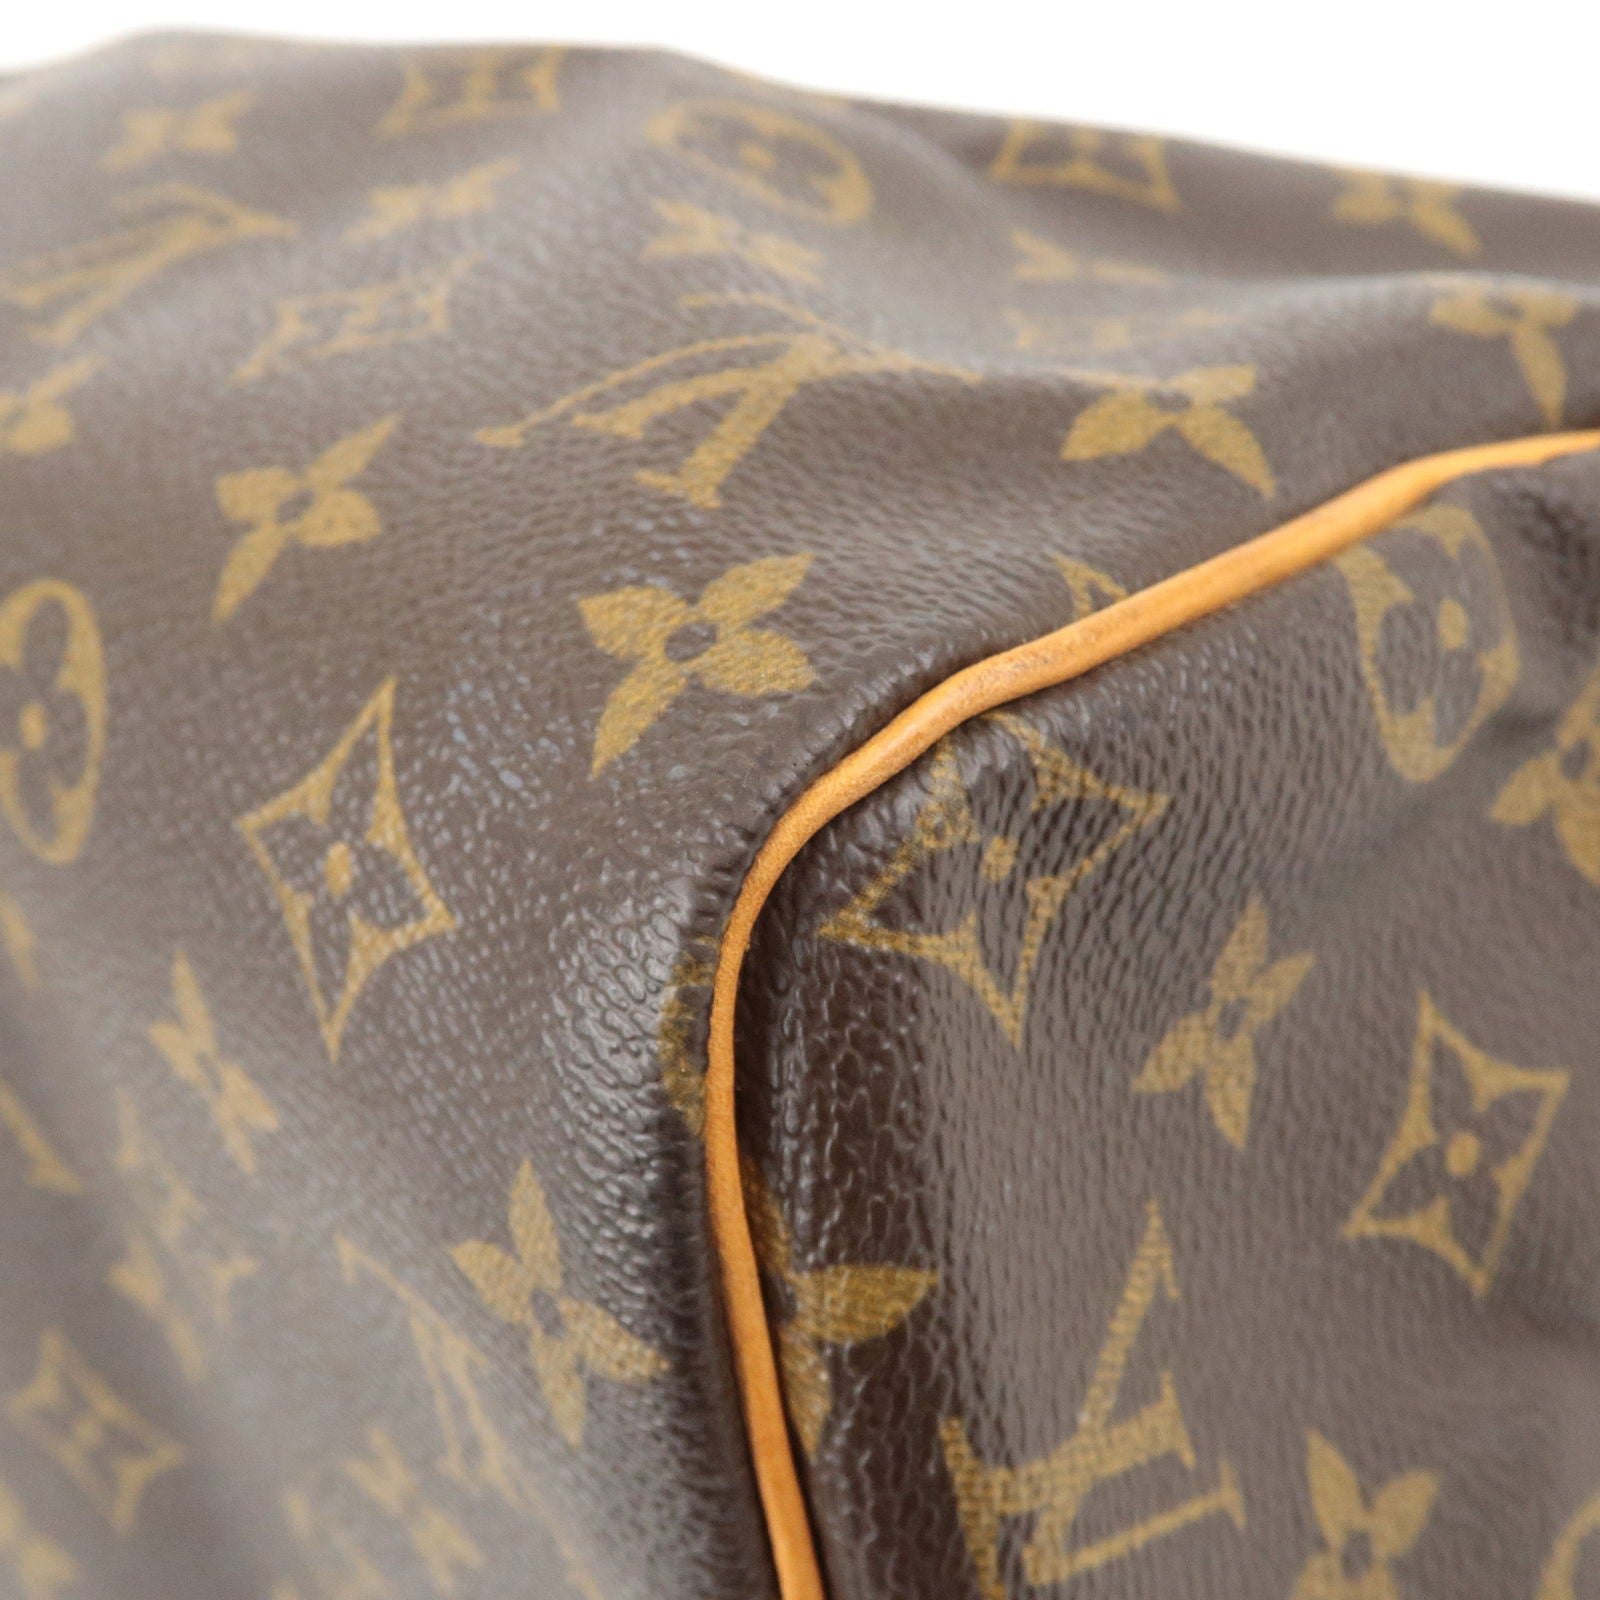 Louis Vuitton 2012 Pre-owned Neverfull PM Tote Bag - Brown